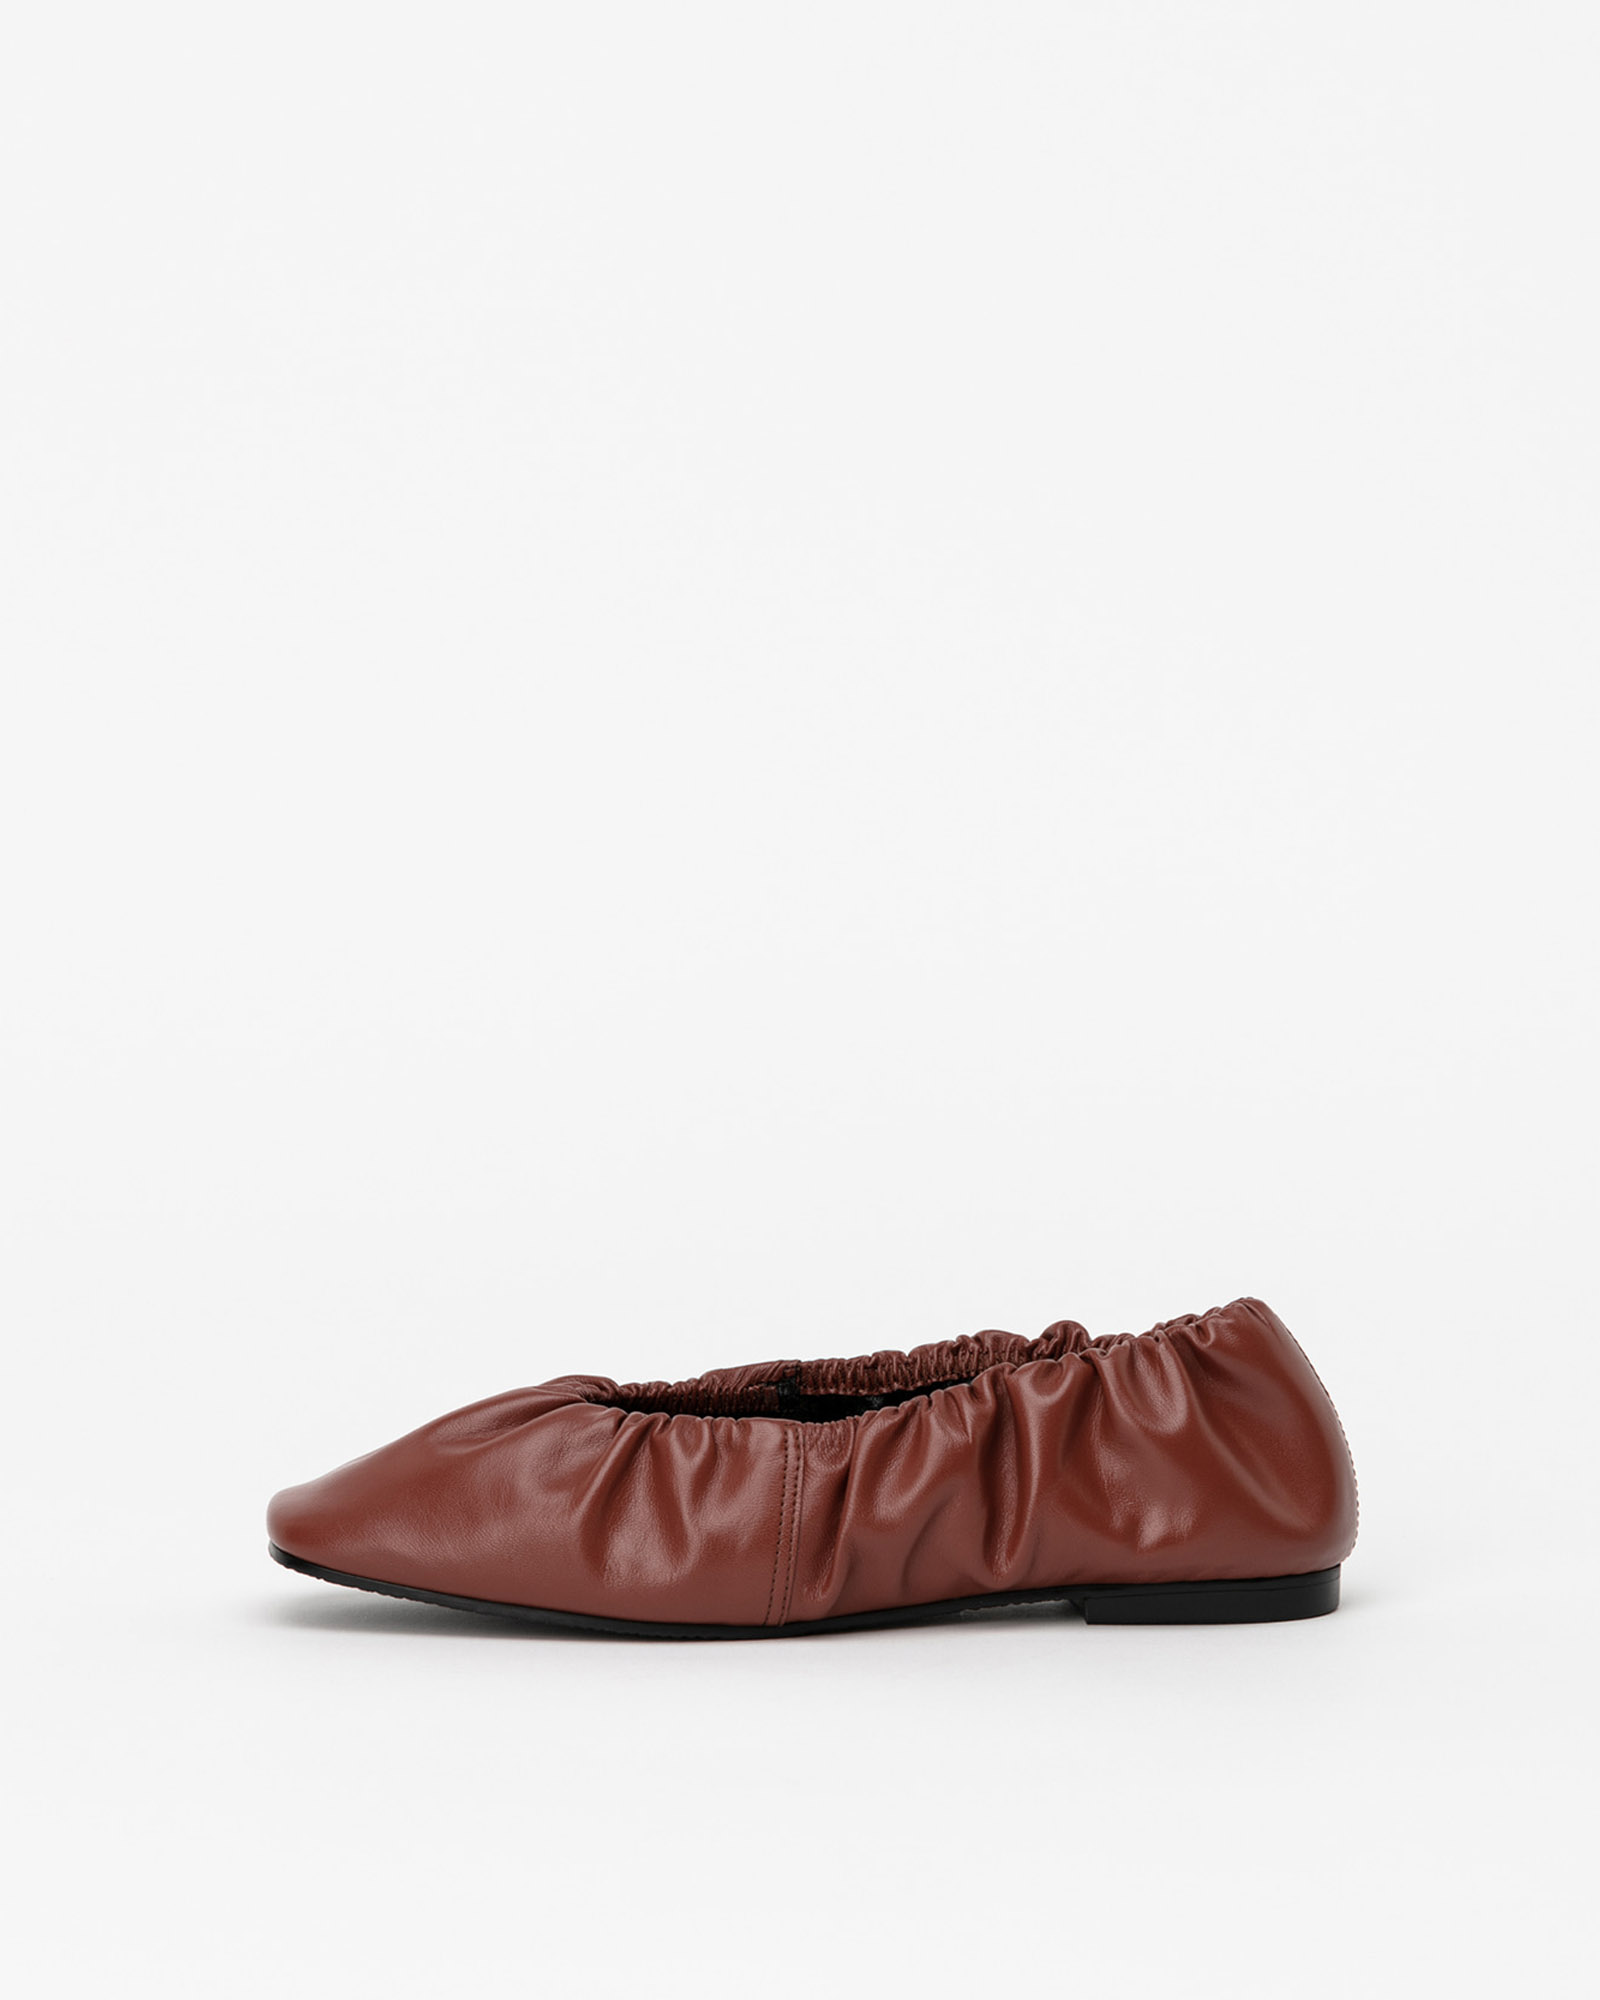 Lucerne Soft Flat Shoes in Ruby Brown